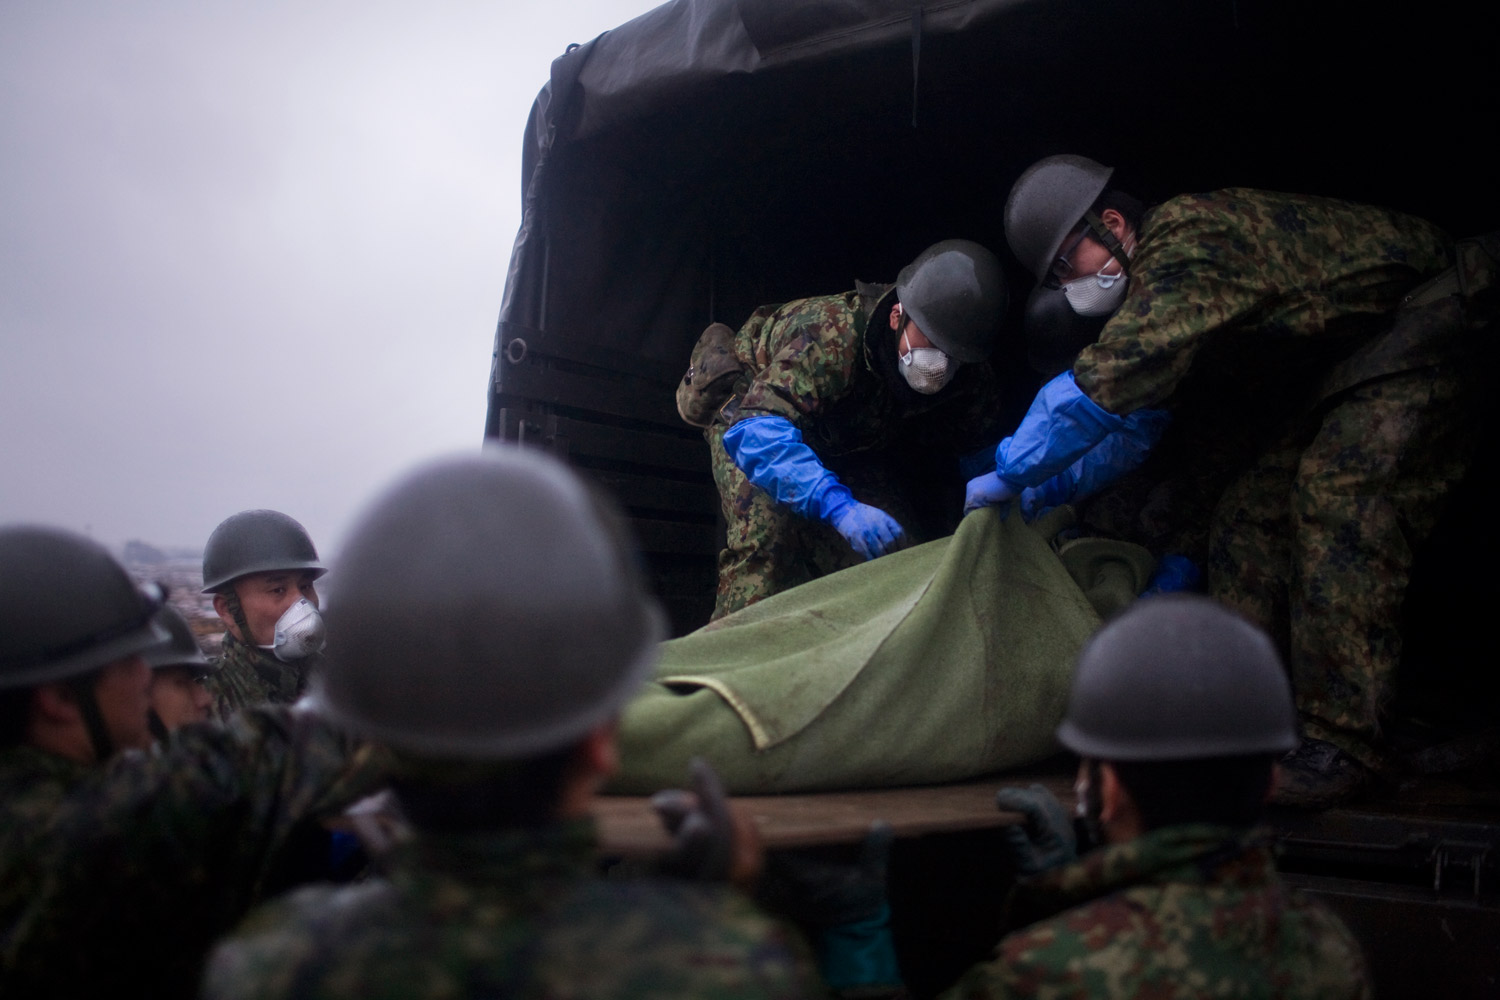 Soldiers pull a victim into a military truck in Natori on March 15, 2011